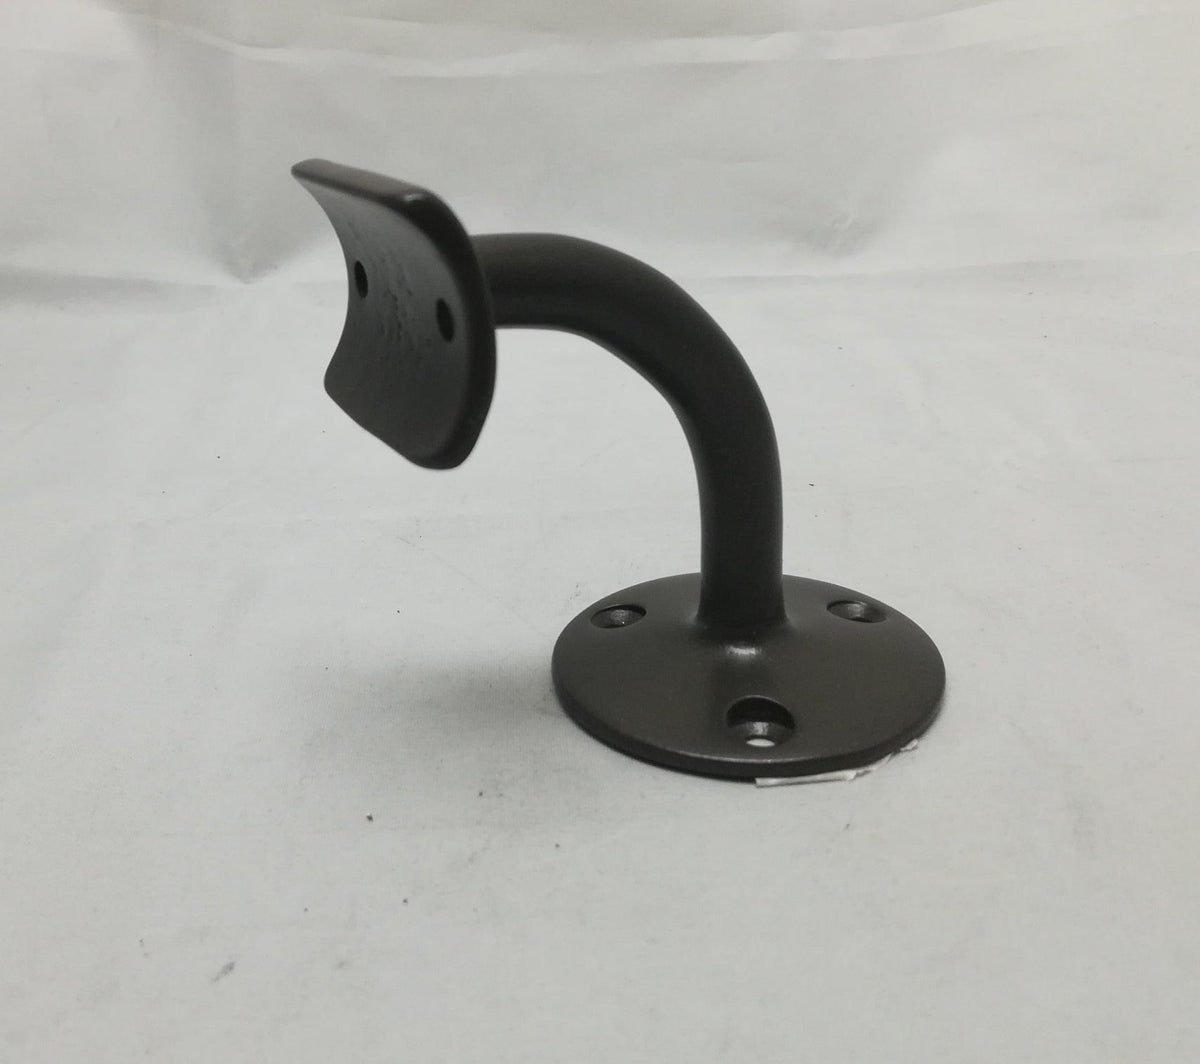 3-Screw Hand Rail Bracket for 2" Tubing Brackets, Components for 2" Od TubingTrade Diversified